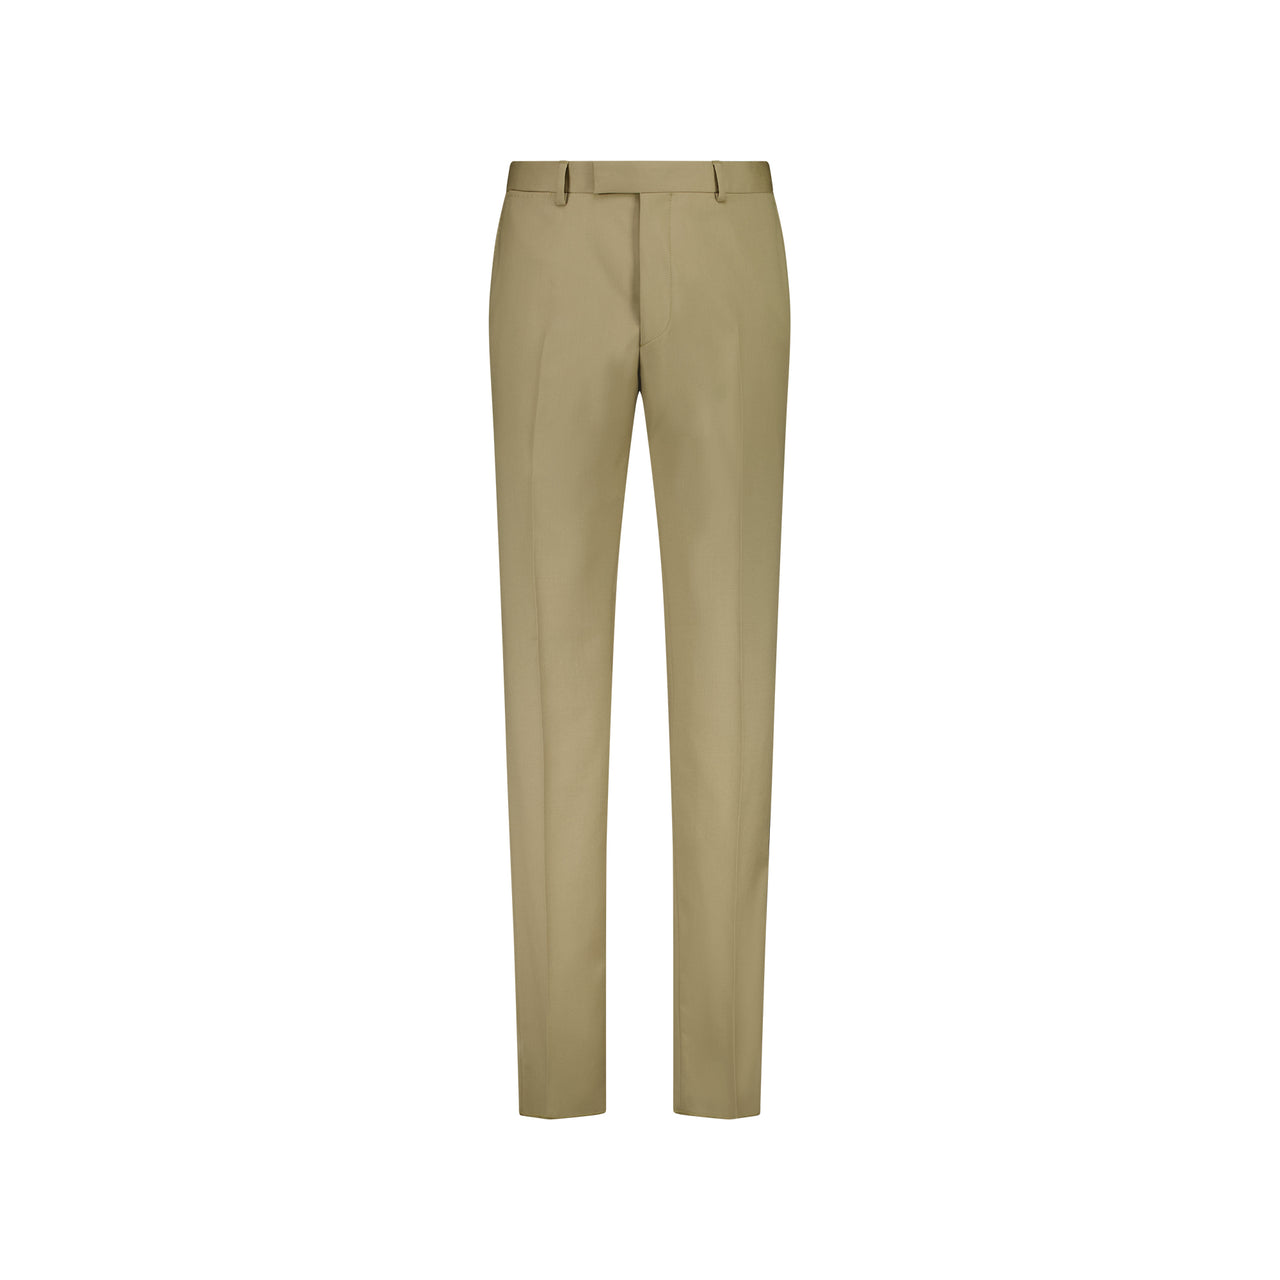 HENRY SARTORIAL Contemporary Wool Trouser CAMEL